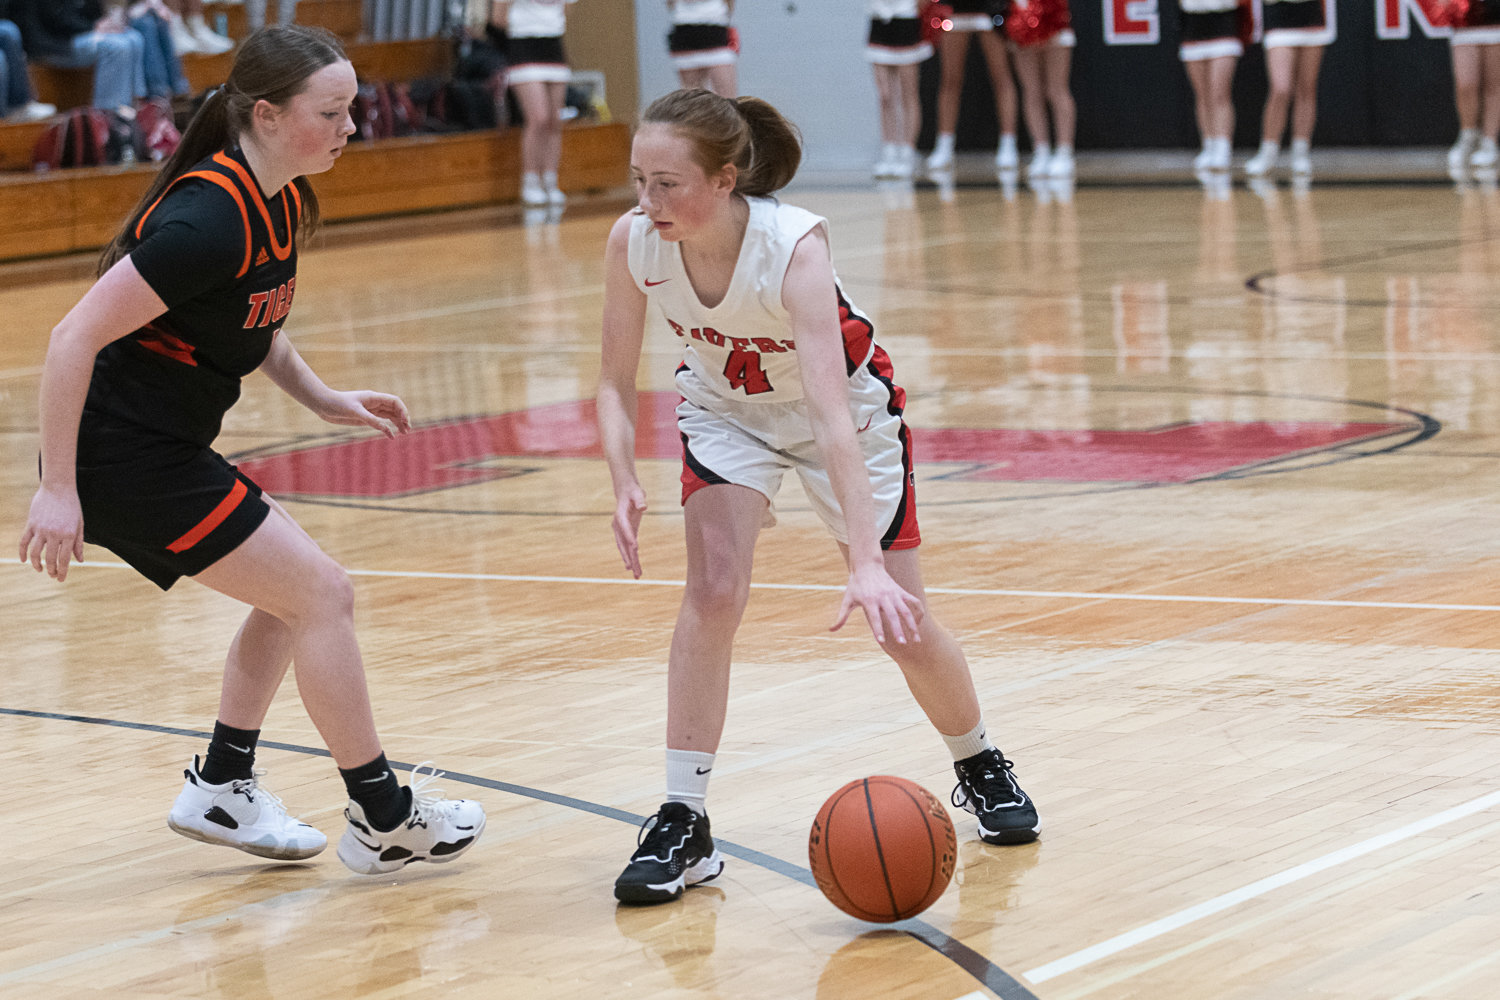 Brynn Williams dribbles the ball during Tenino's 56-16 loss to Centralia on Dec. 1.